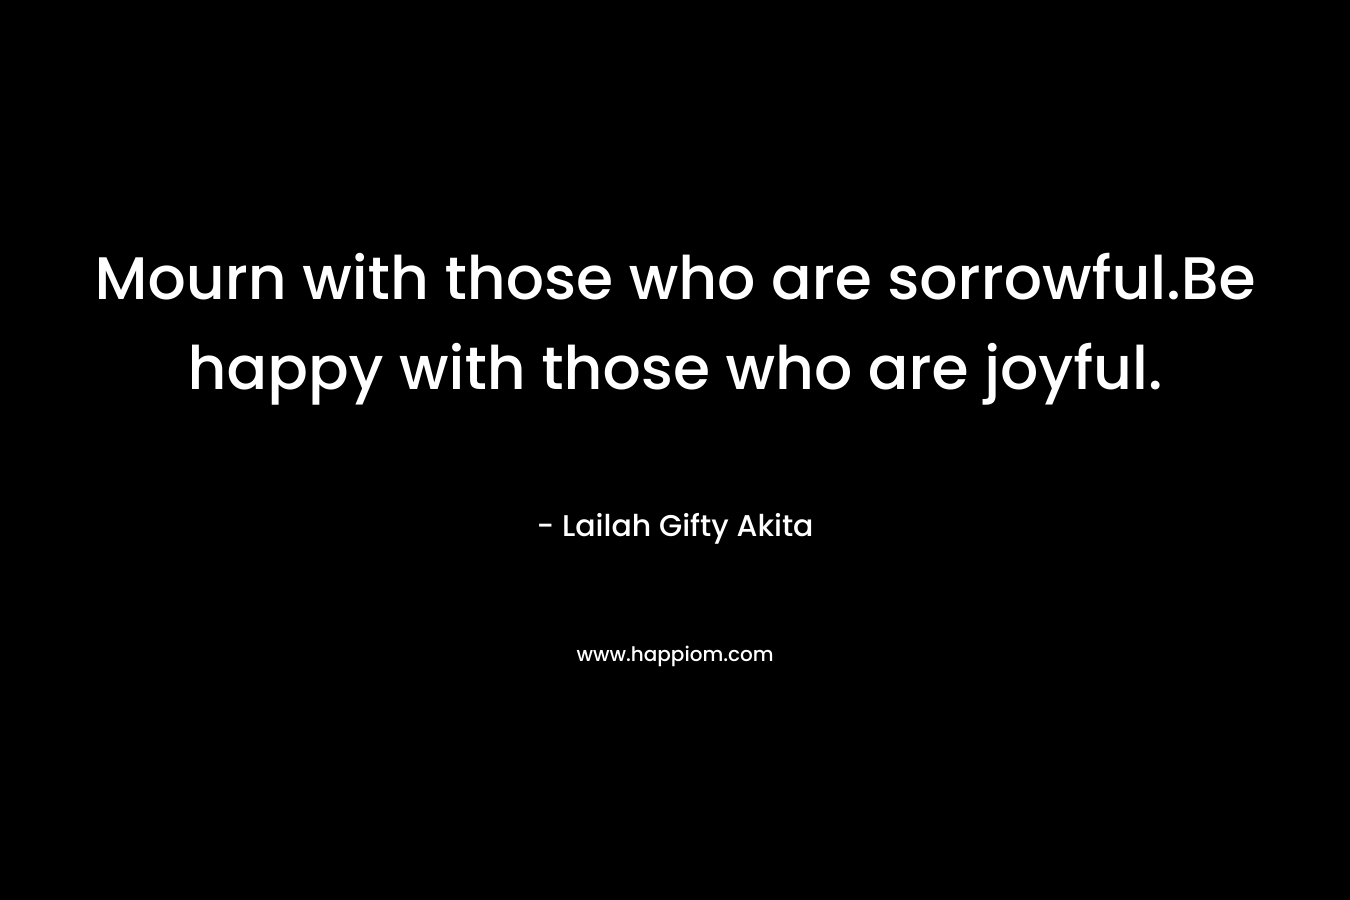 Mourn with those who are sorrowful.Be happy with those who are joyful.